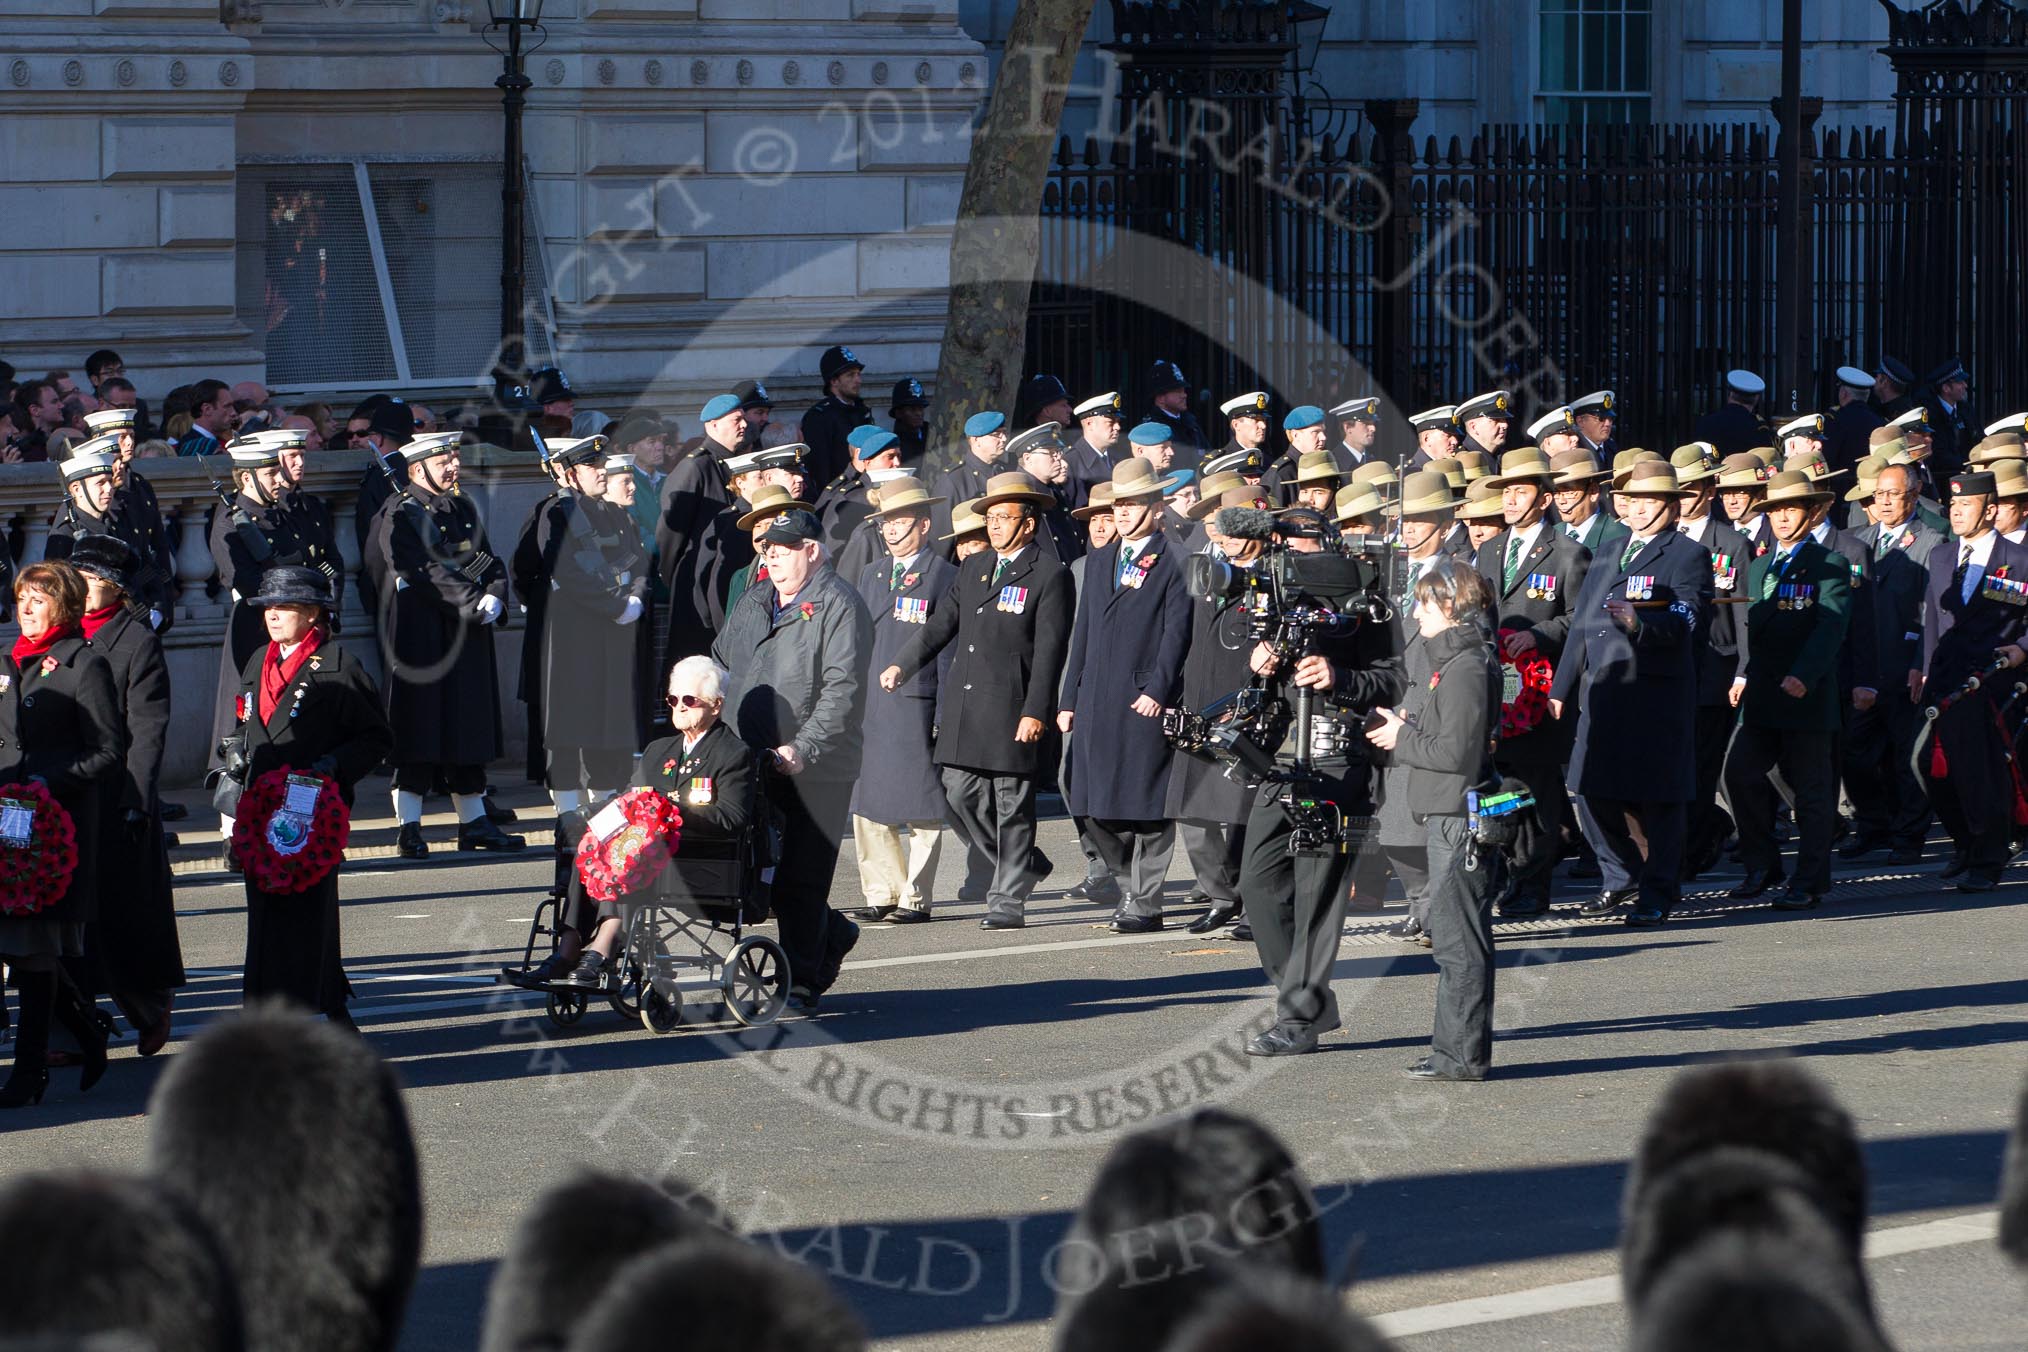 Remembrance Sunday 2012 Cenotaph March Past: Group D6 - War Widows Association and D7 - British Gurkha Welfare Society..
Whitehall, Cenotaph,
London SW1,

United Kingdom,
on 11 November 2012 at 12:06, image #1275